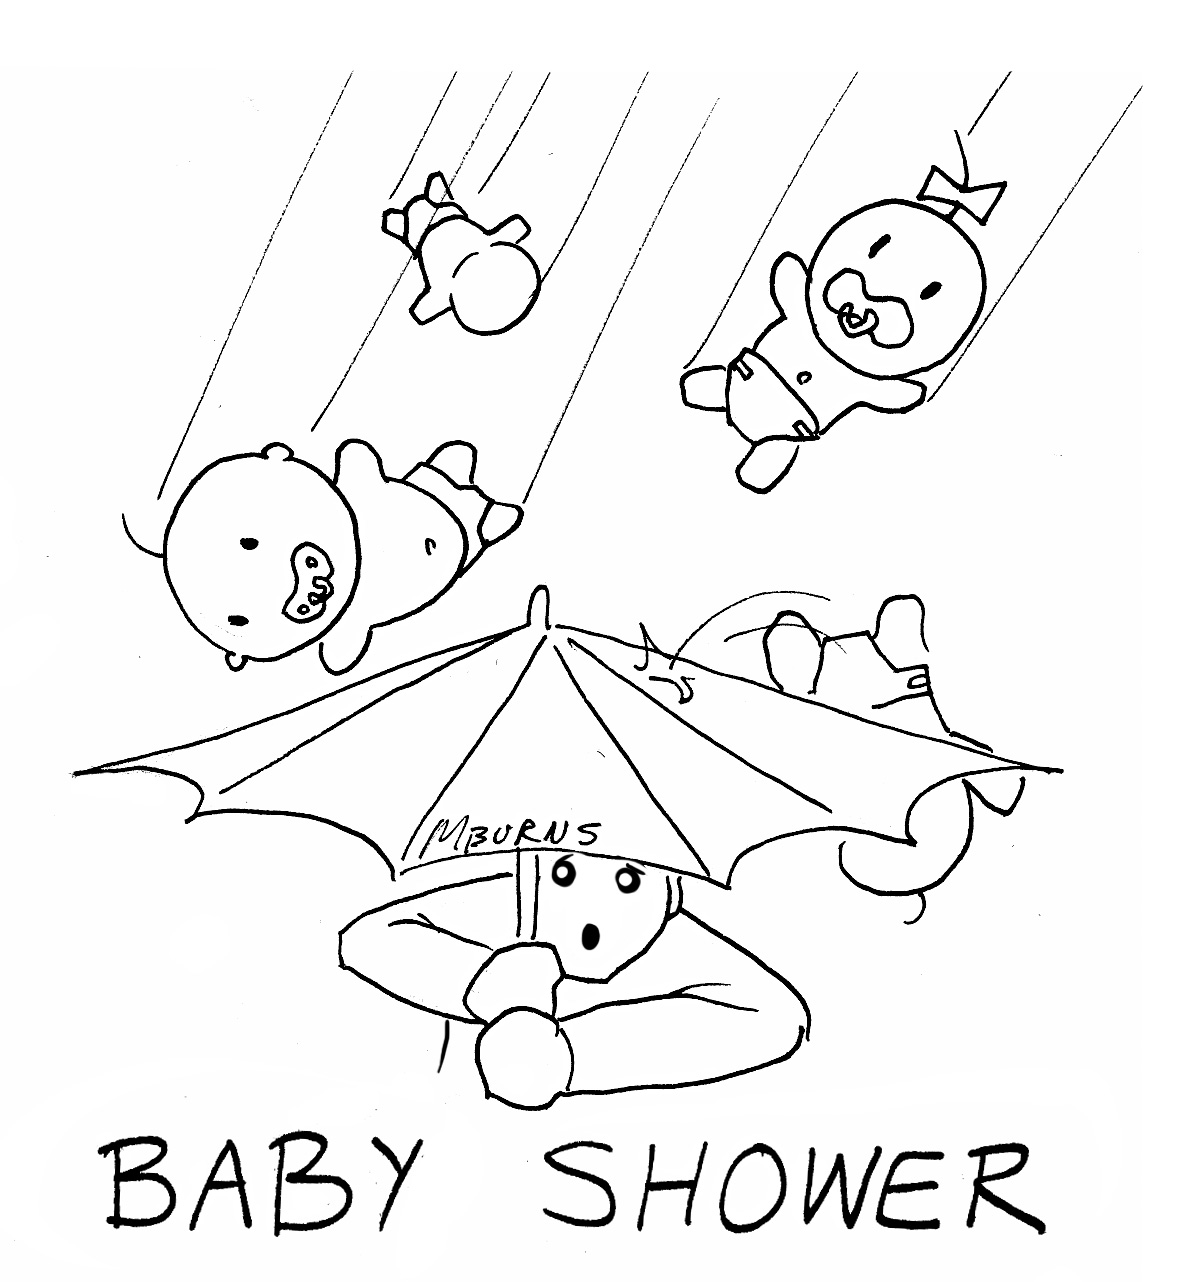 Shower coloring #18, Download drawings